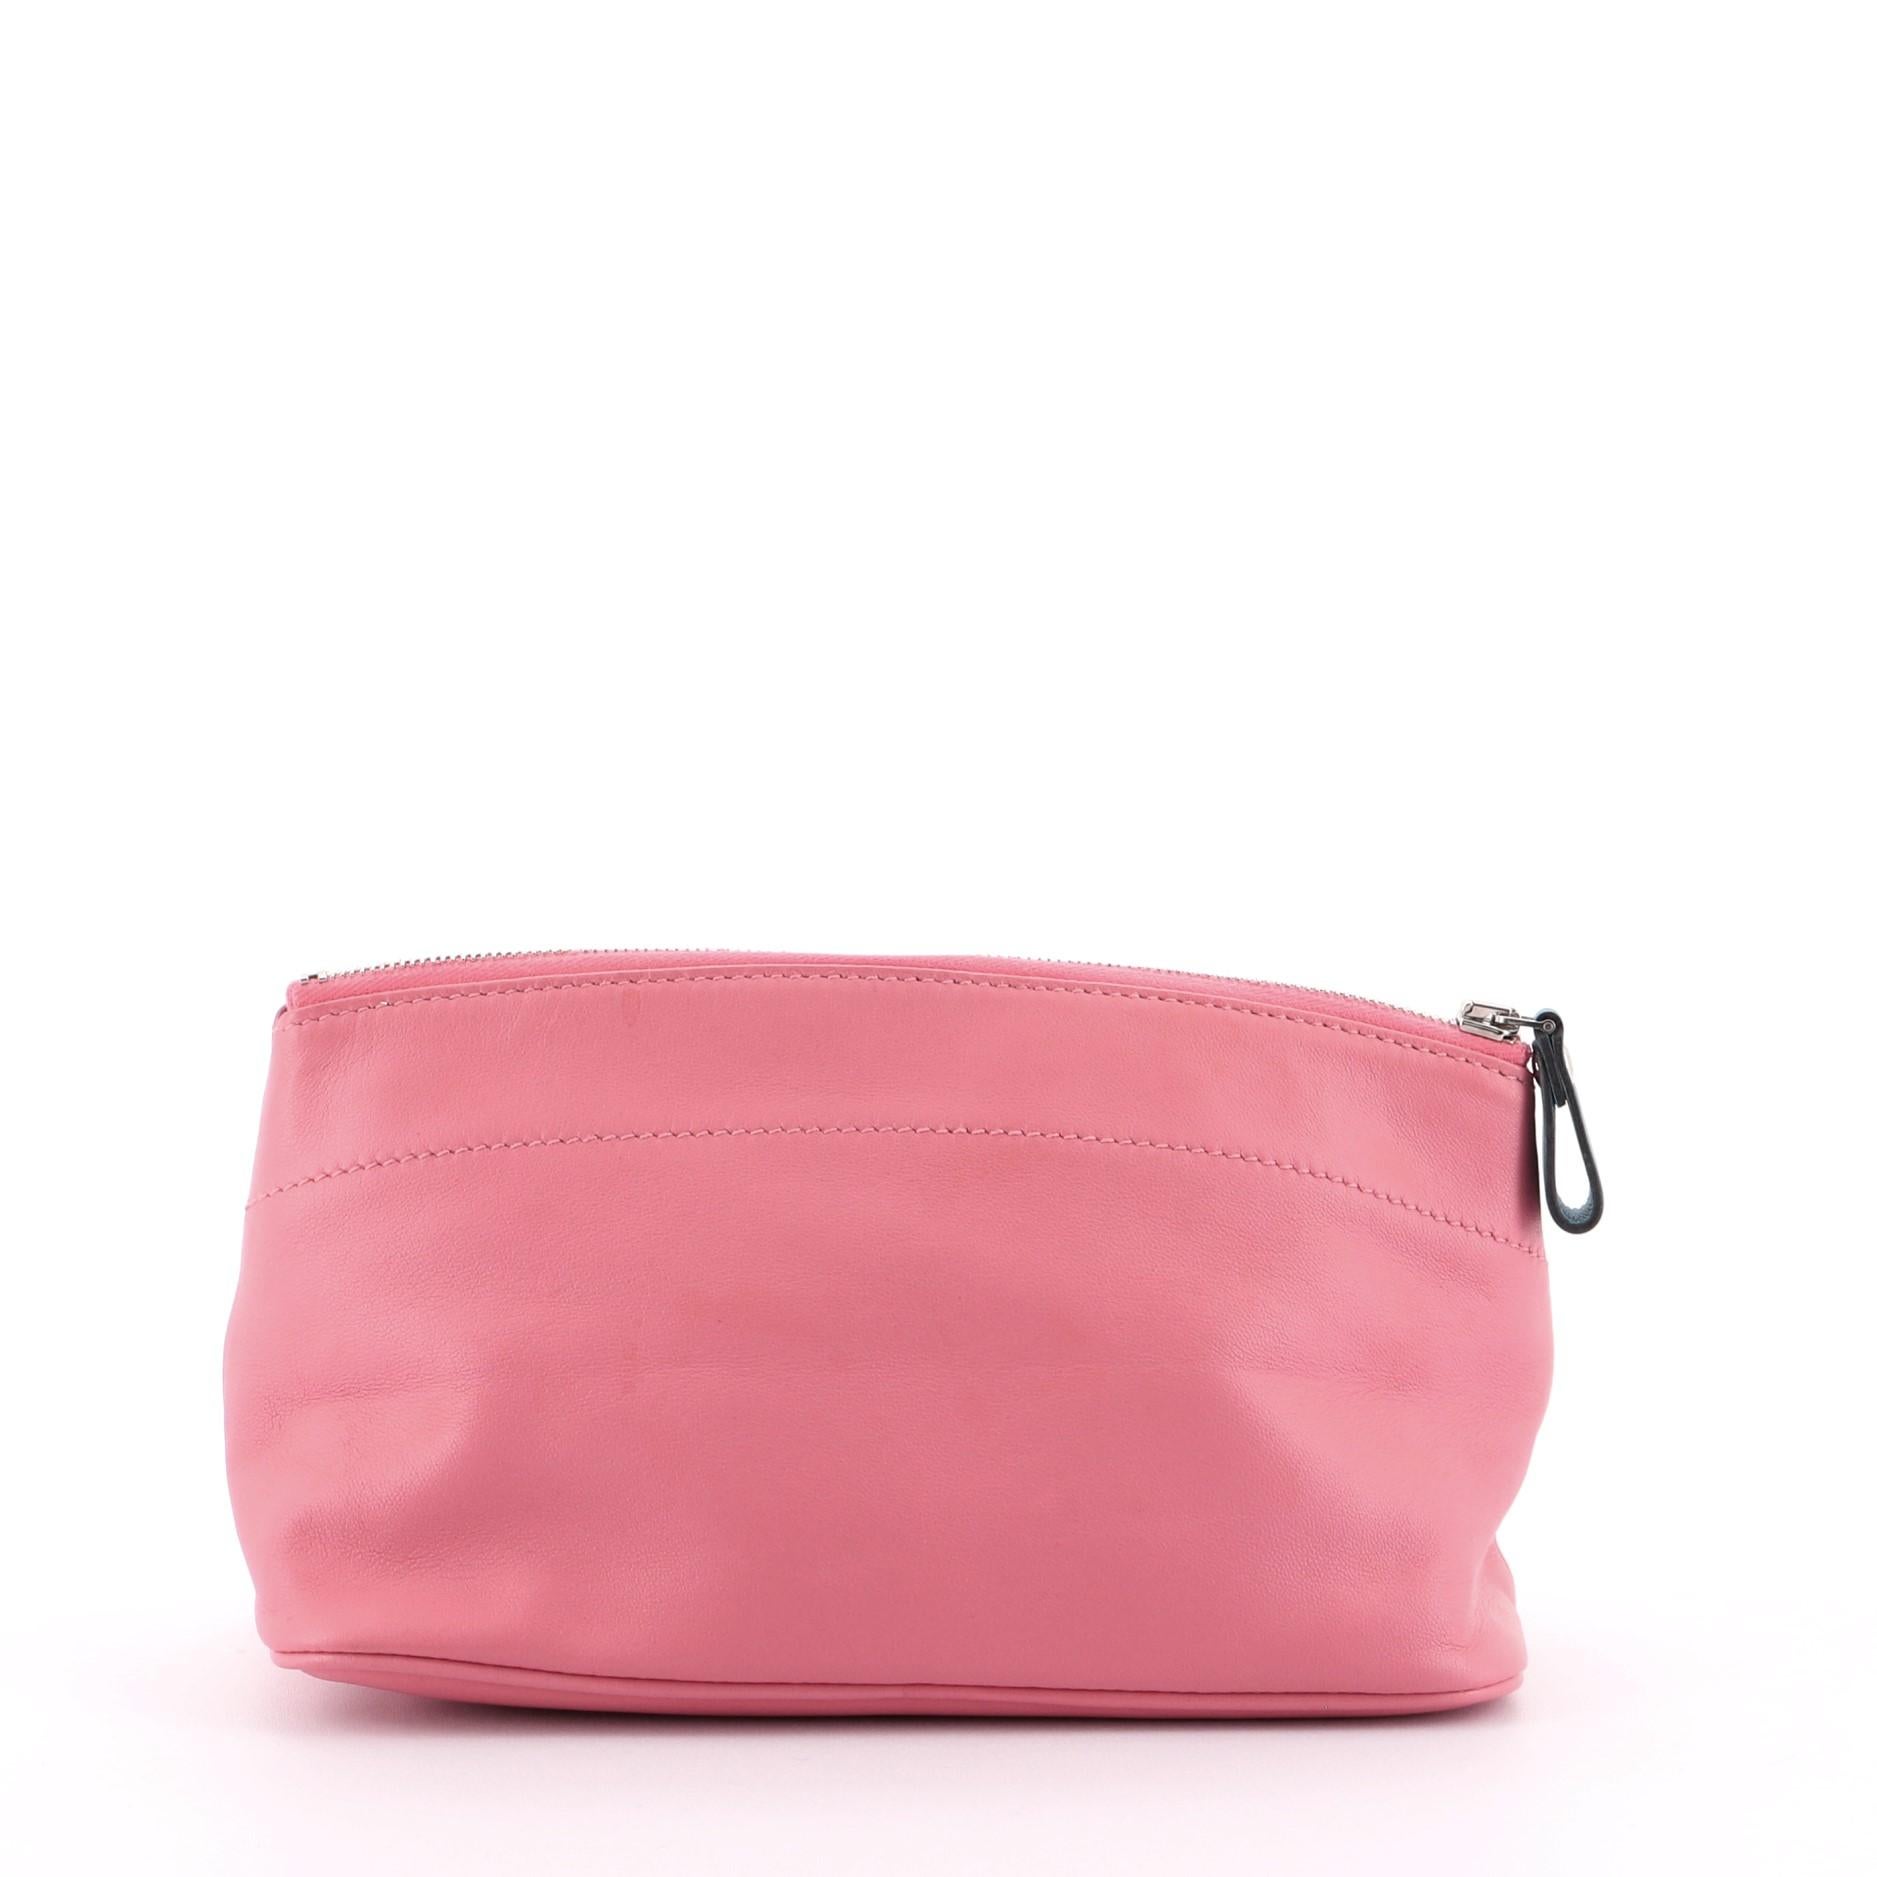 Hermes Tohubohu Pouch Milo Lambskin PM
Pink Lambskin

Condition Details: Creasing, wear, darkening and small stains on exterior, darkening on zipper tape, minor wear in interior, scratches on hardware.

50589MSC

Height 